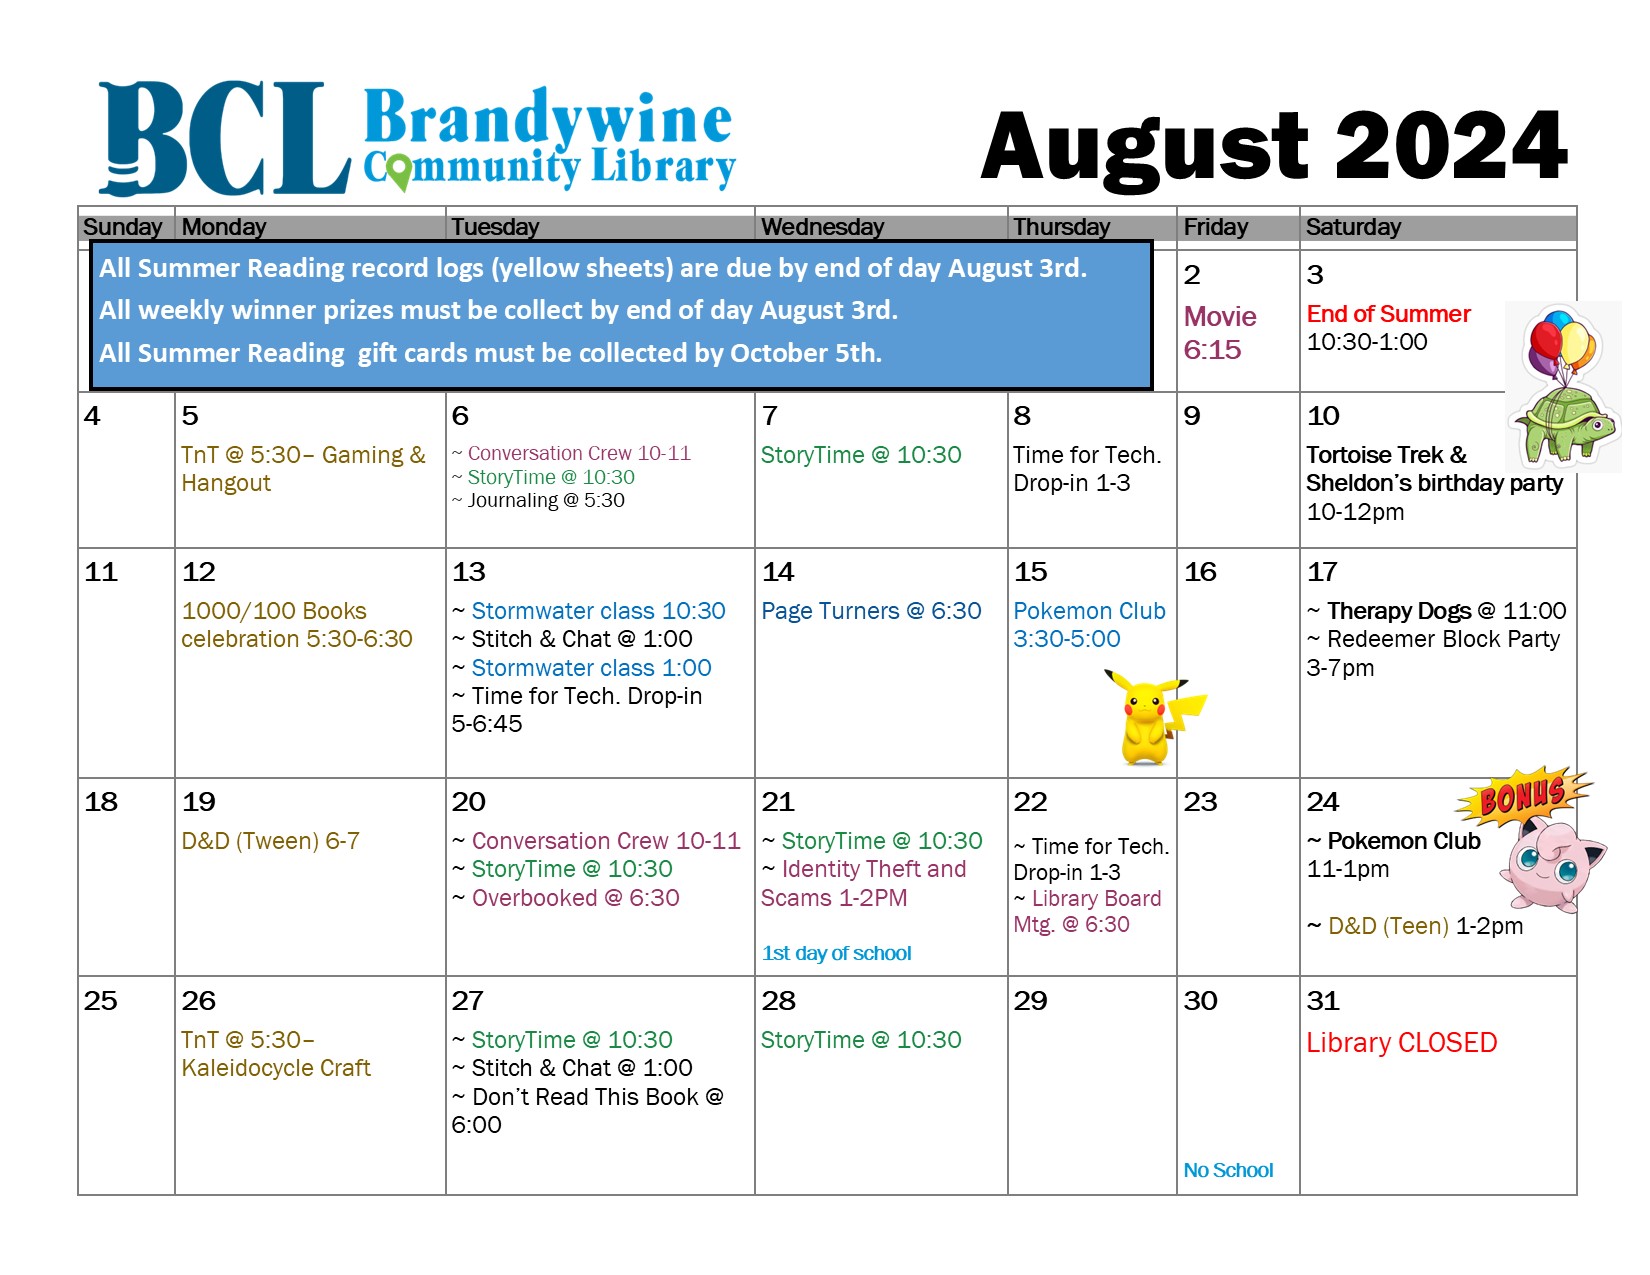 August events